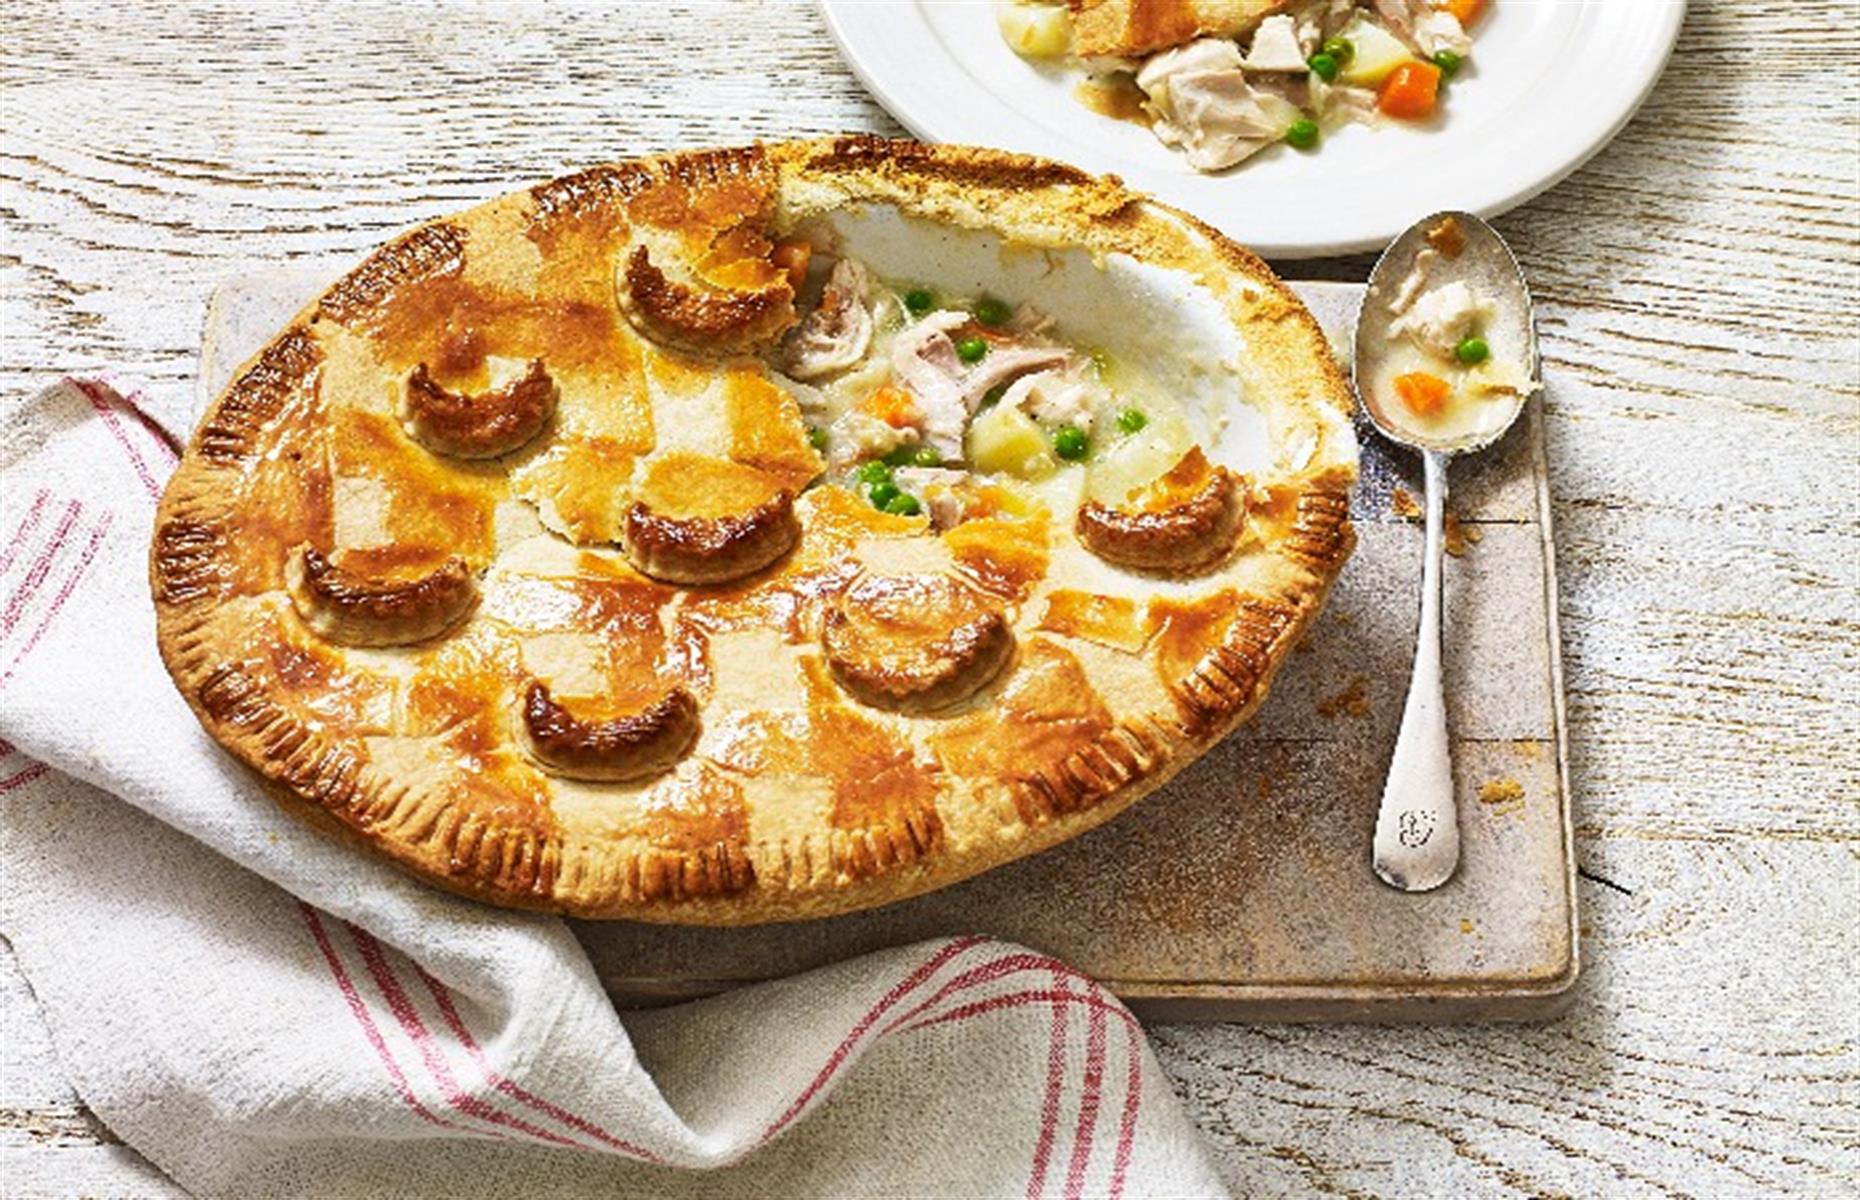 Every pie recipe you'll ever need, from lemon meringue to classic chicken